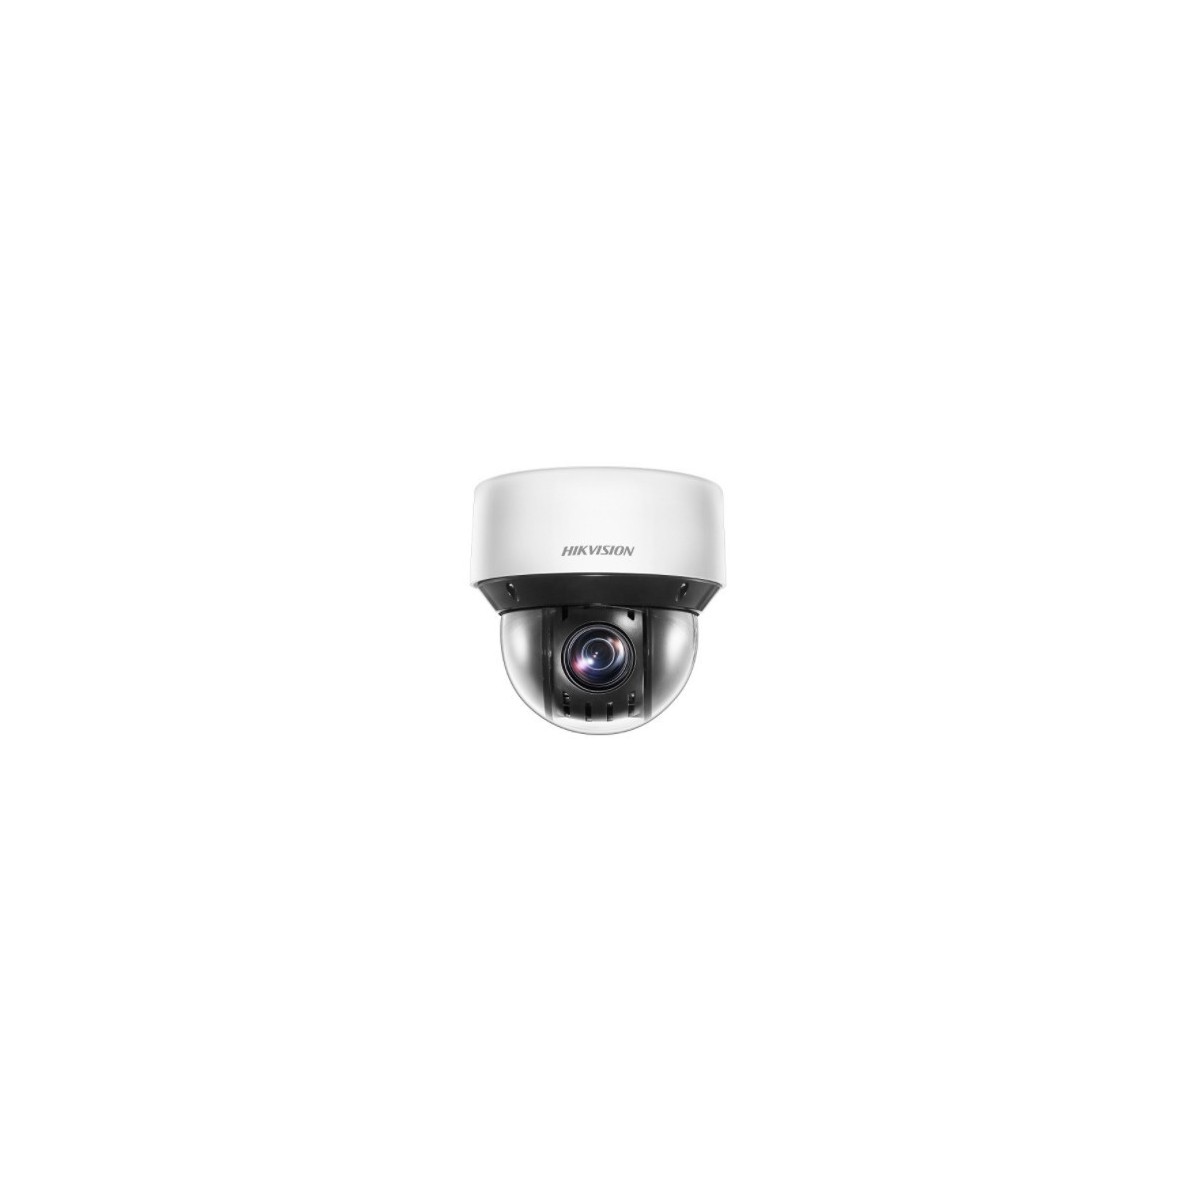 Hikvision 2DE4A225IW-DE S6 PTZ 2MP Powered by Darkfighter - Network Camera